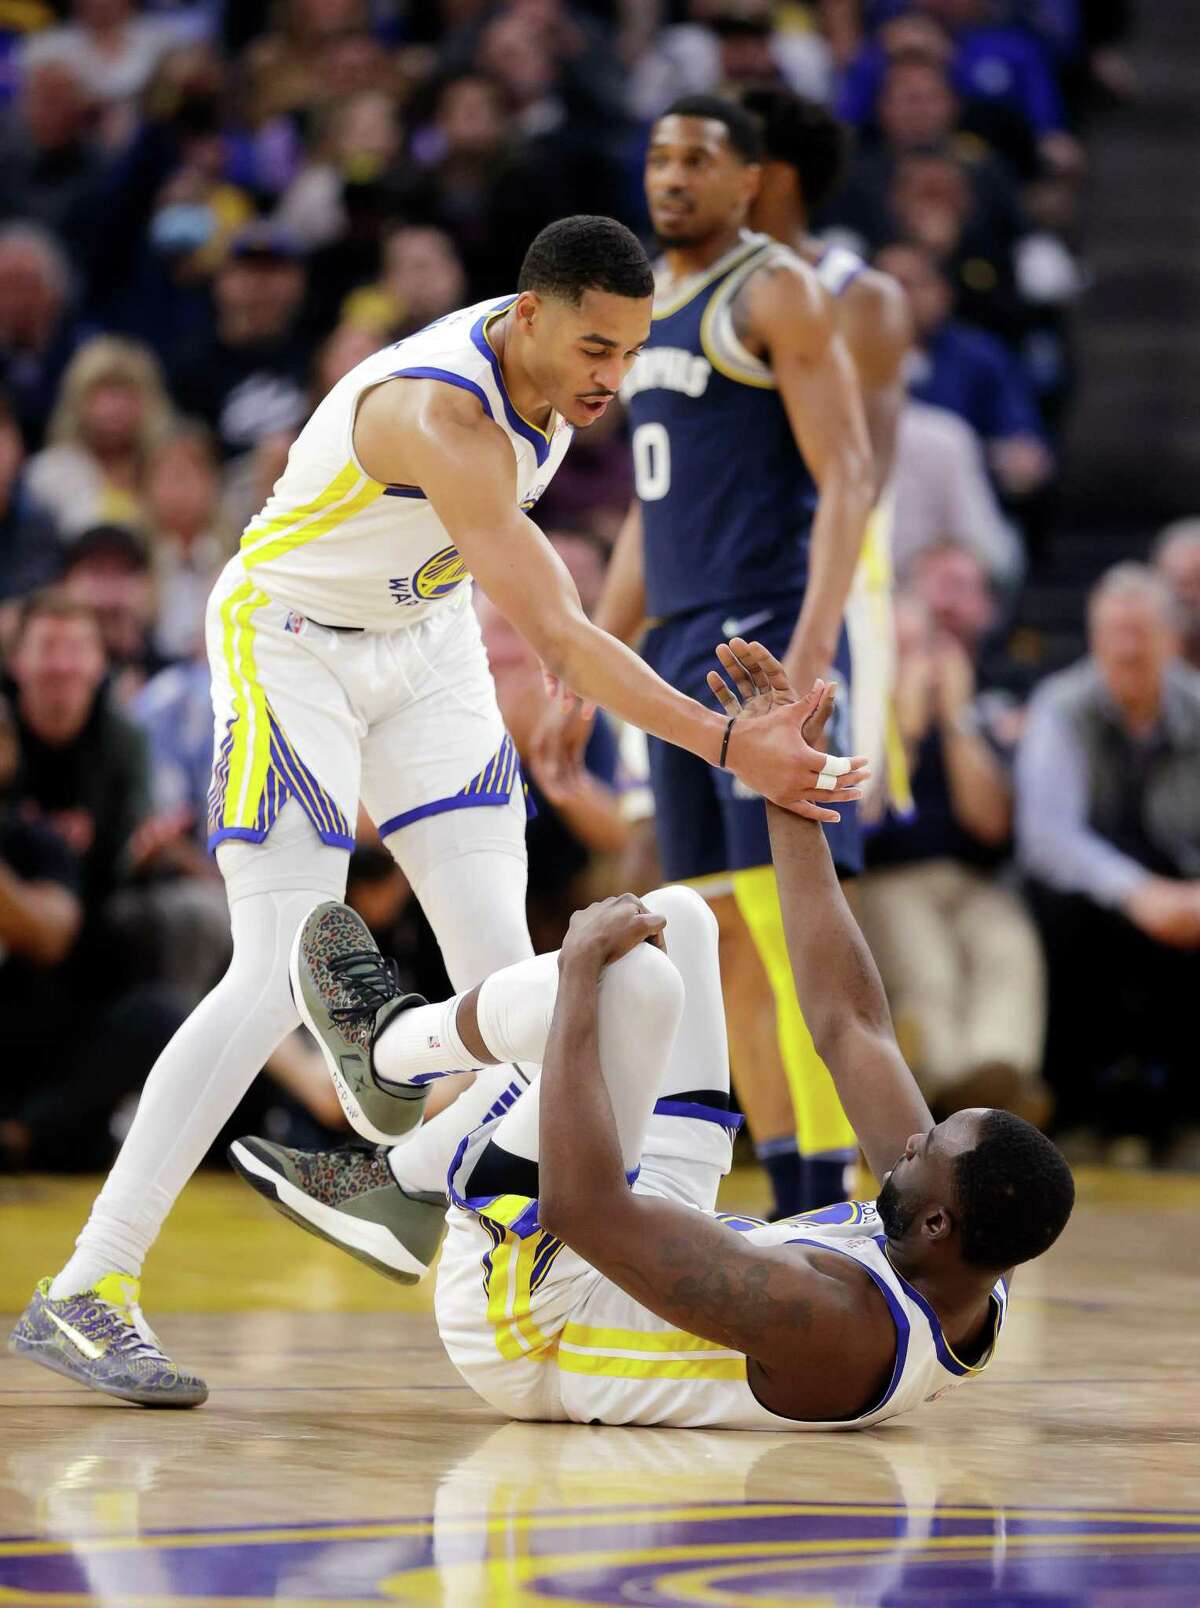 Jordan Poole (3) helps up Draymond Green (23) in the first half as the Golden State Warriors played the Memphis Grizzlies in Game 4 of the Western Conference Semifinals of the NBA Playoffs at Chase Center, in San Francisco, Calif., on Monday, May 9, 2022.